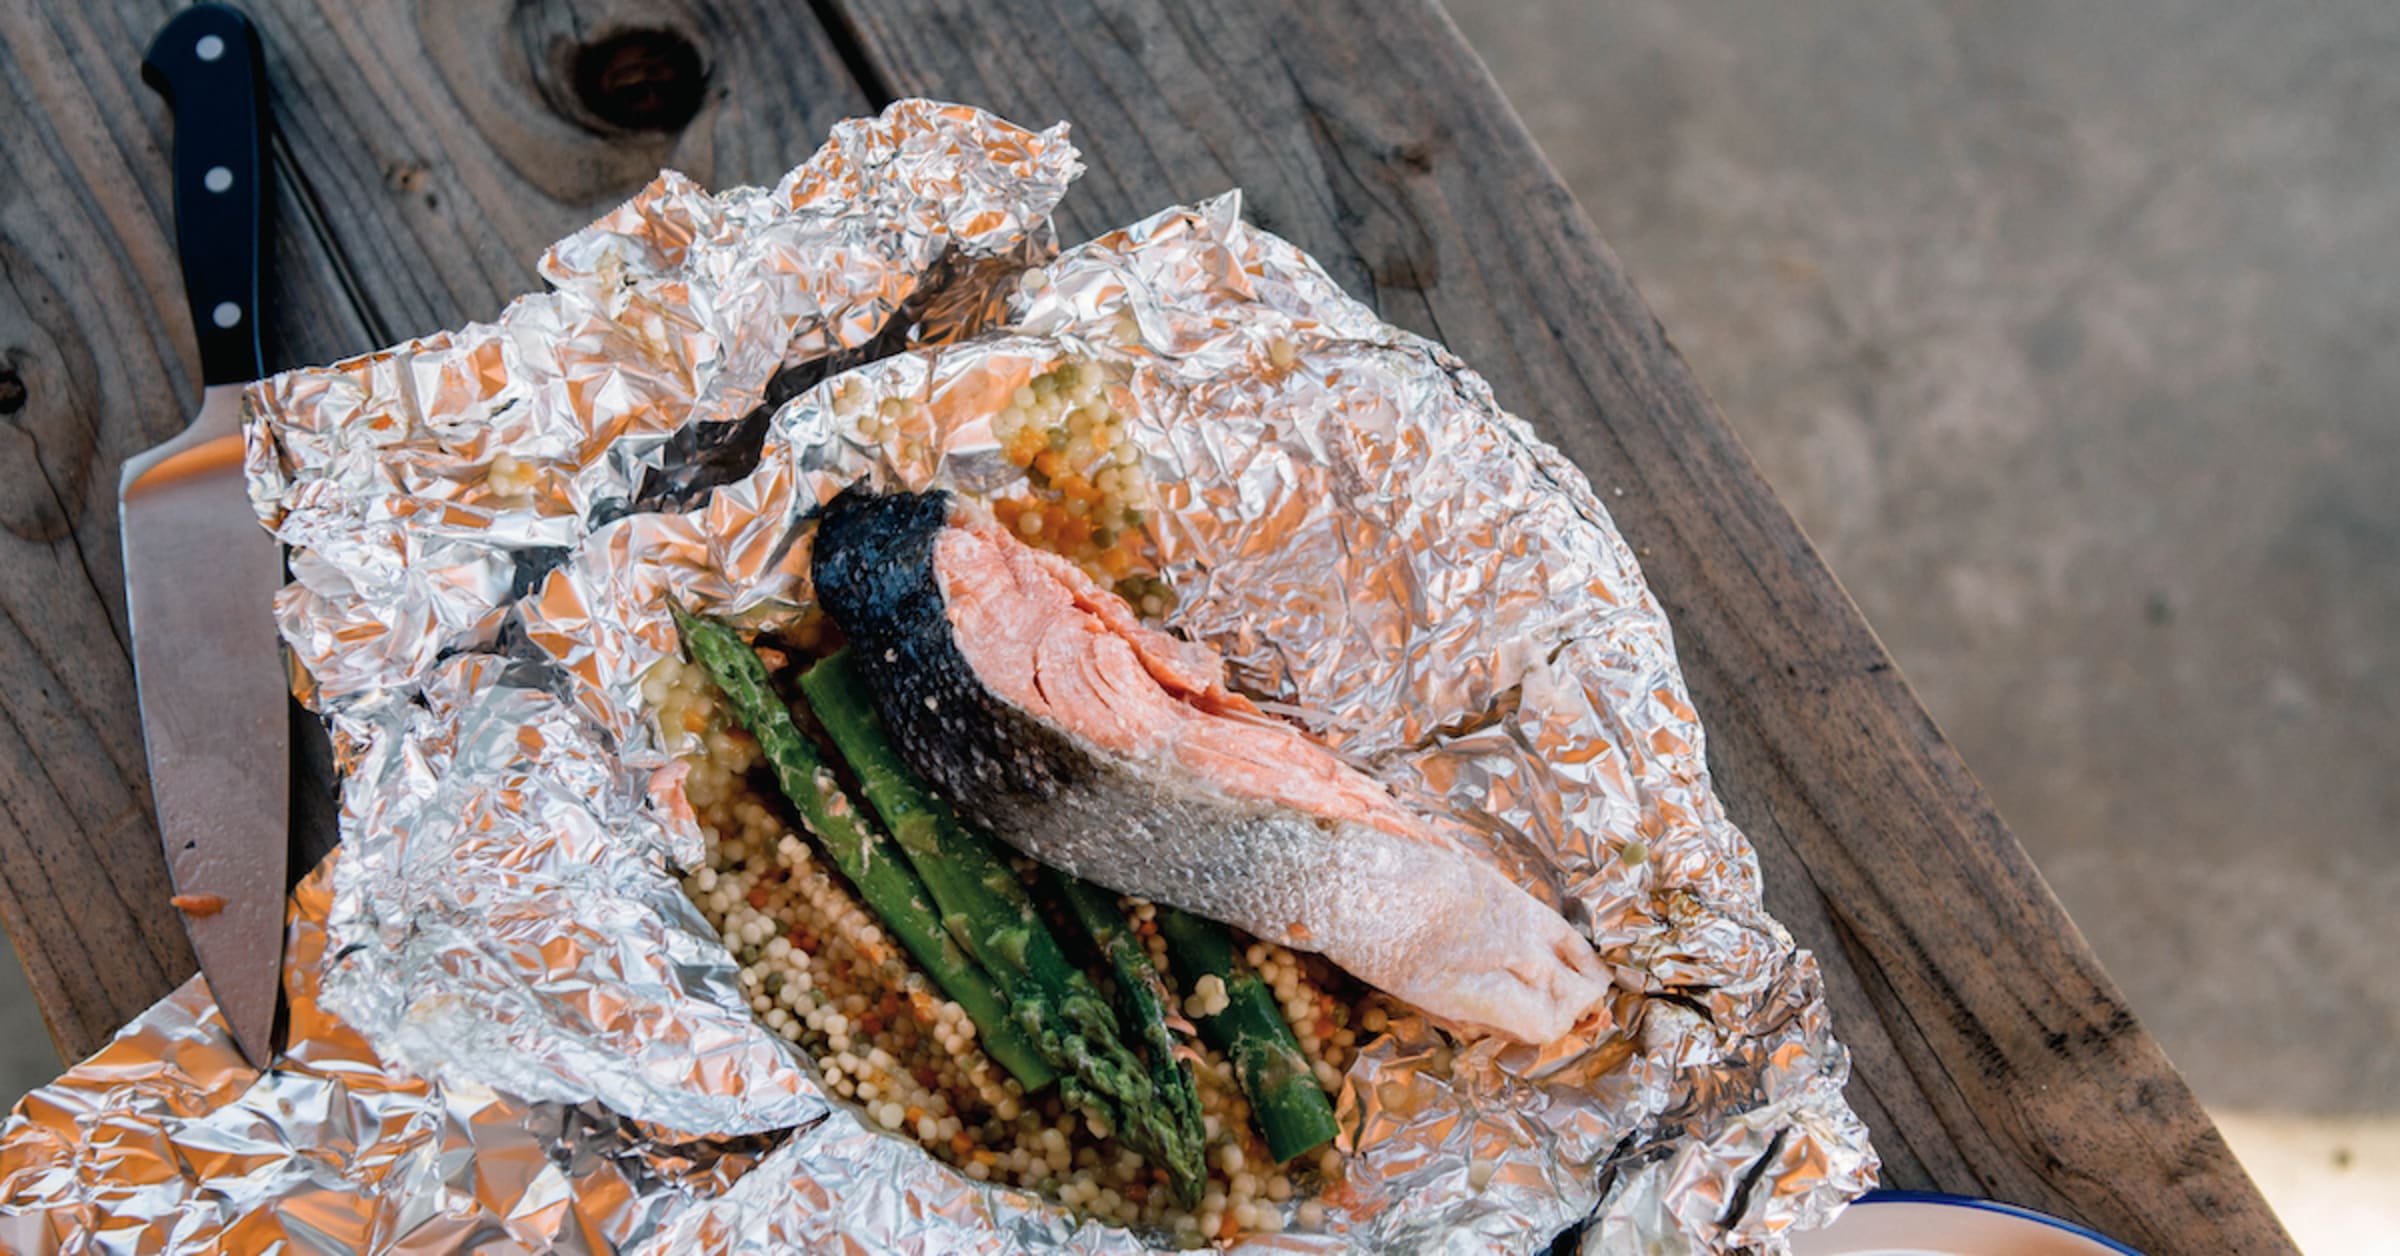 Camping Recipe: Salmon, Asparagus and Pearl Couscous Foil Pack